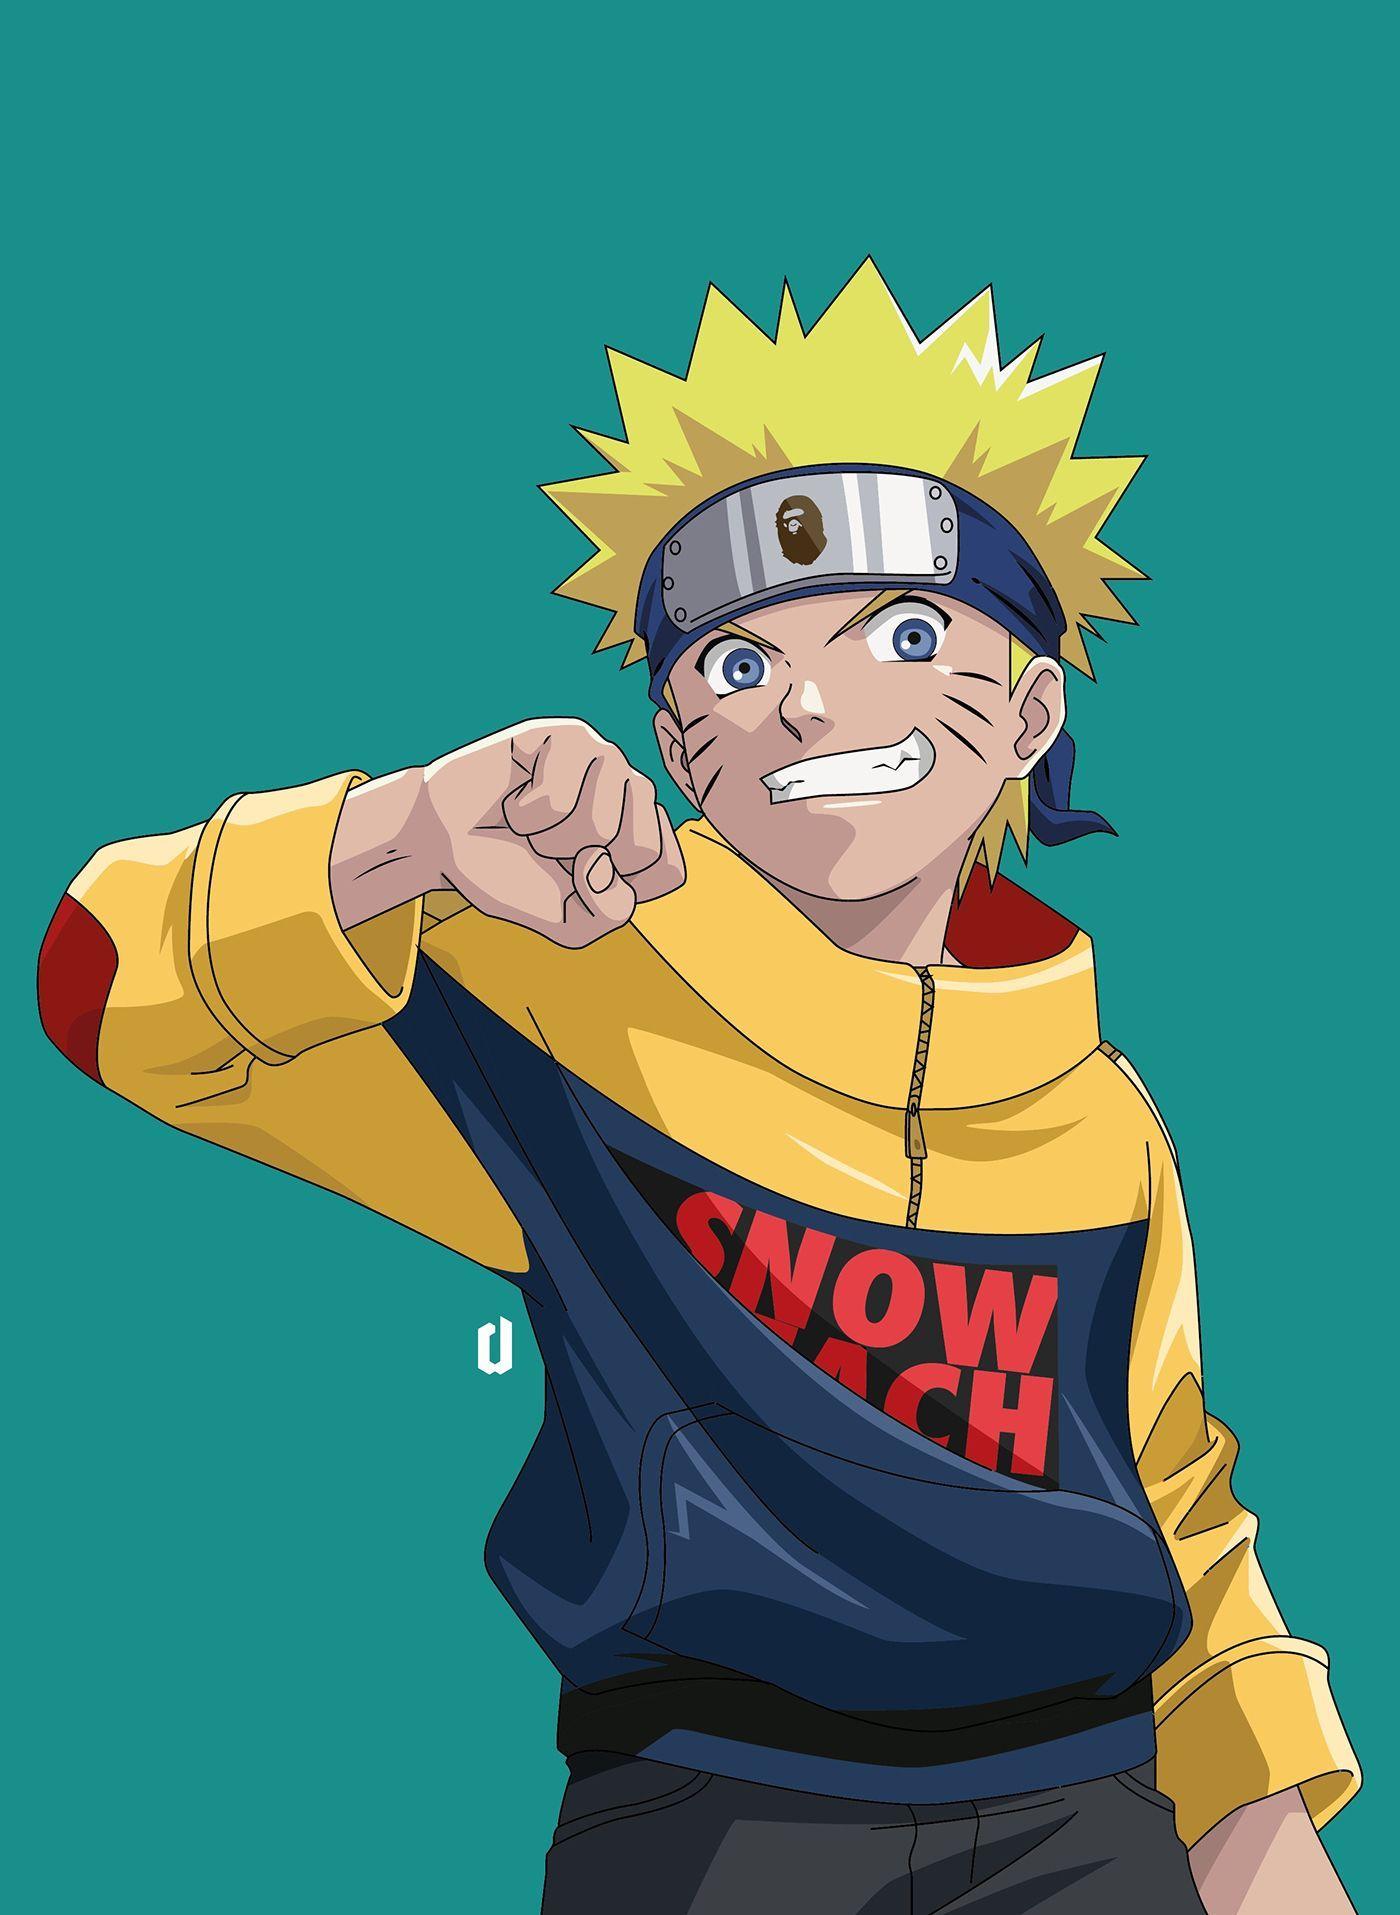 Naruto Supreme Wallpapers Top Free Naruto Supreme Backgrounds Wallpaperaccess A collection of the top 53 naruto swag wallpapers and backgrounds available for download for free. naruto supreme wallpapers top free